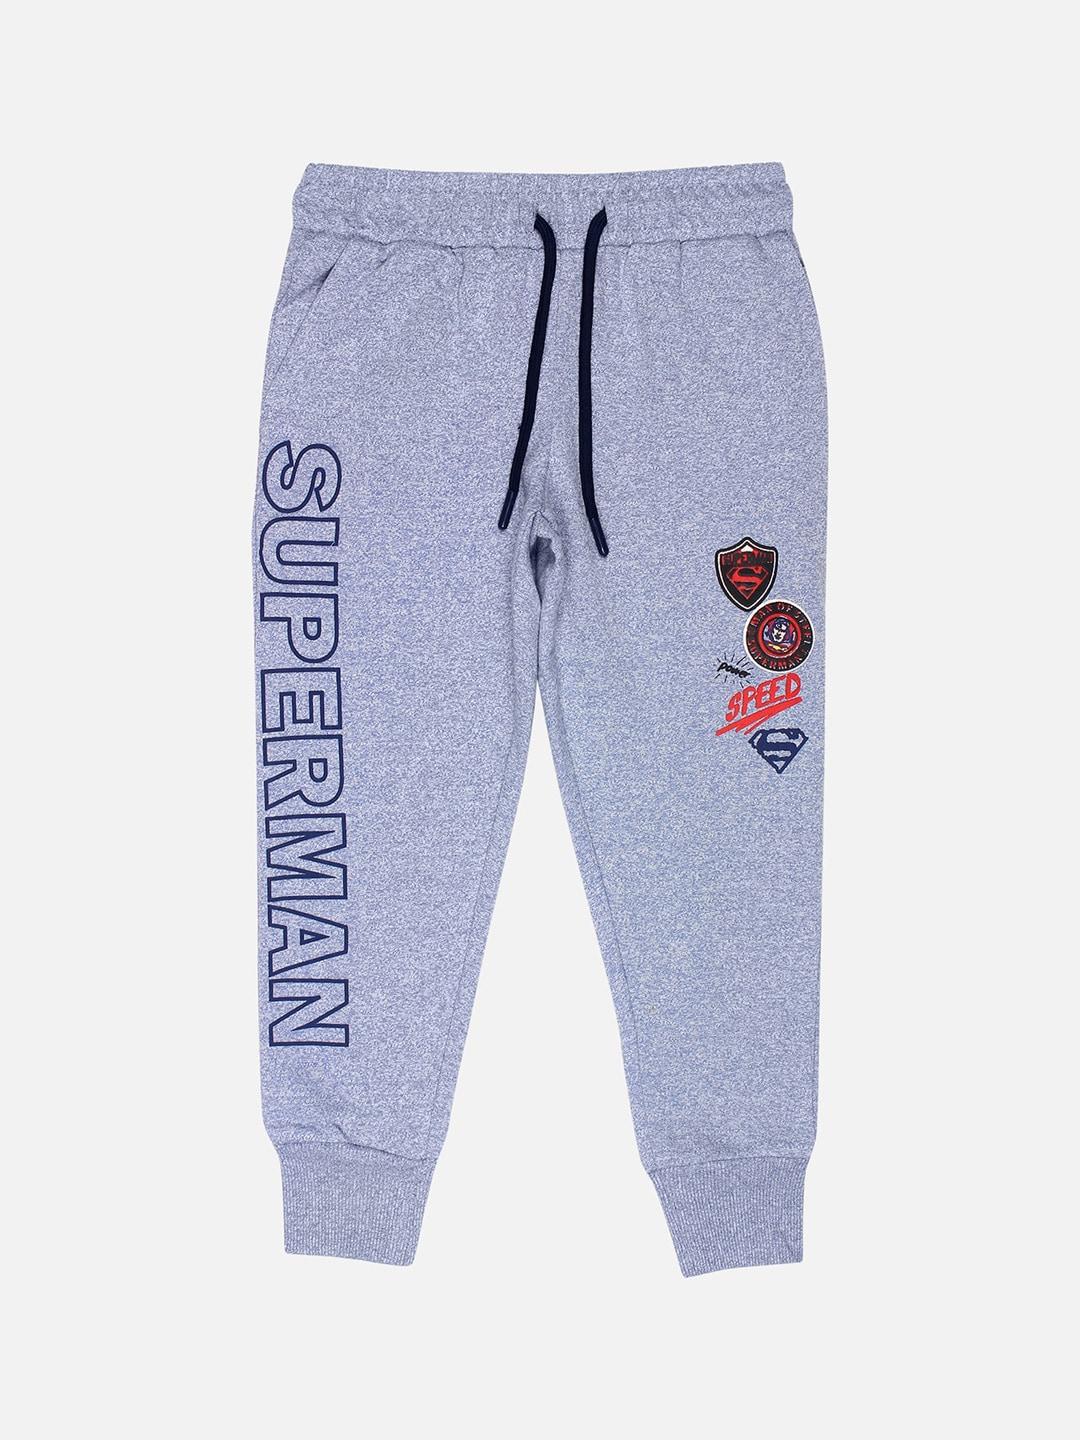 kids ville superman featured boys blue & grey printed pure cotton joggers